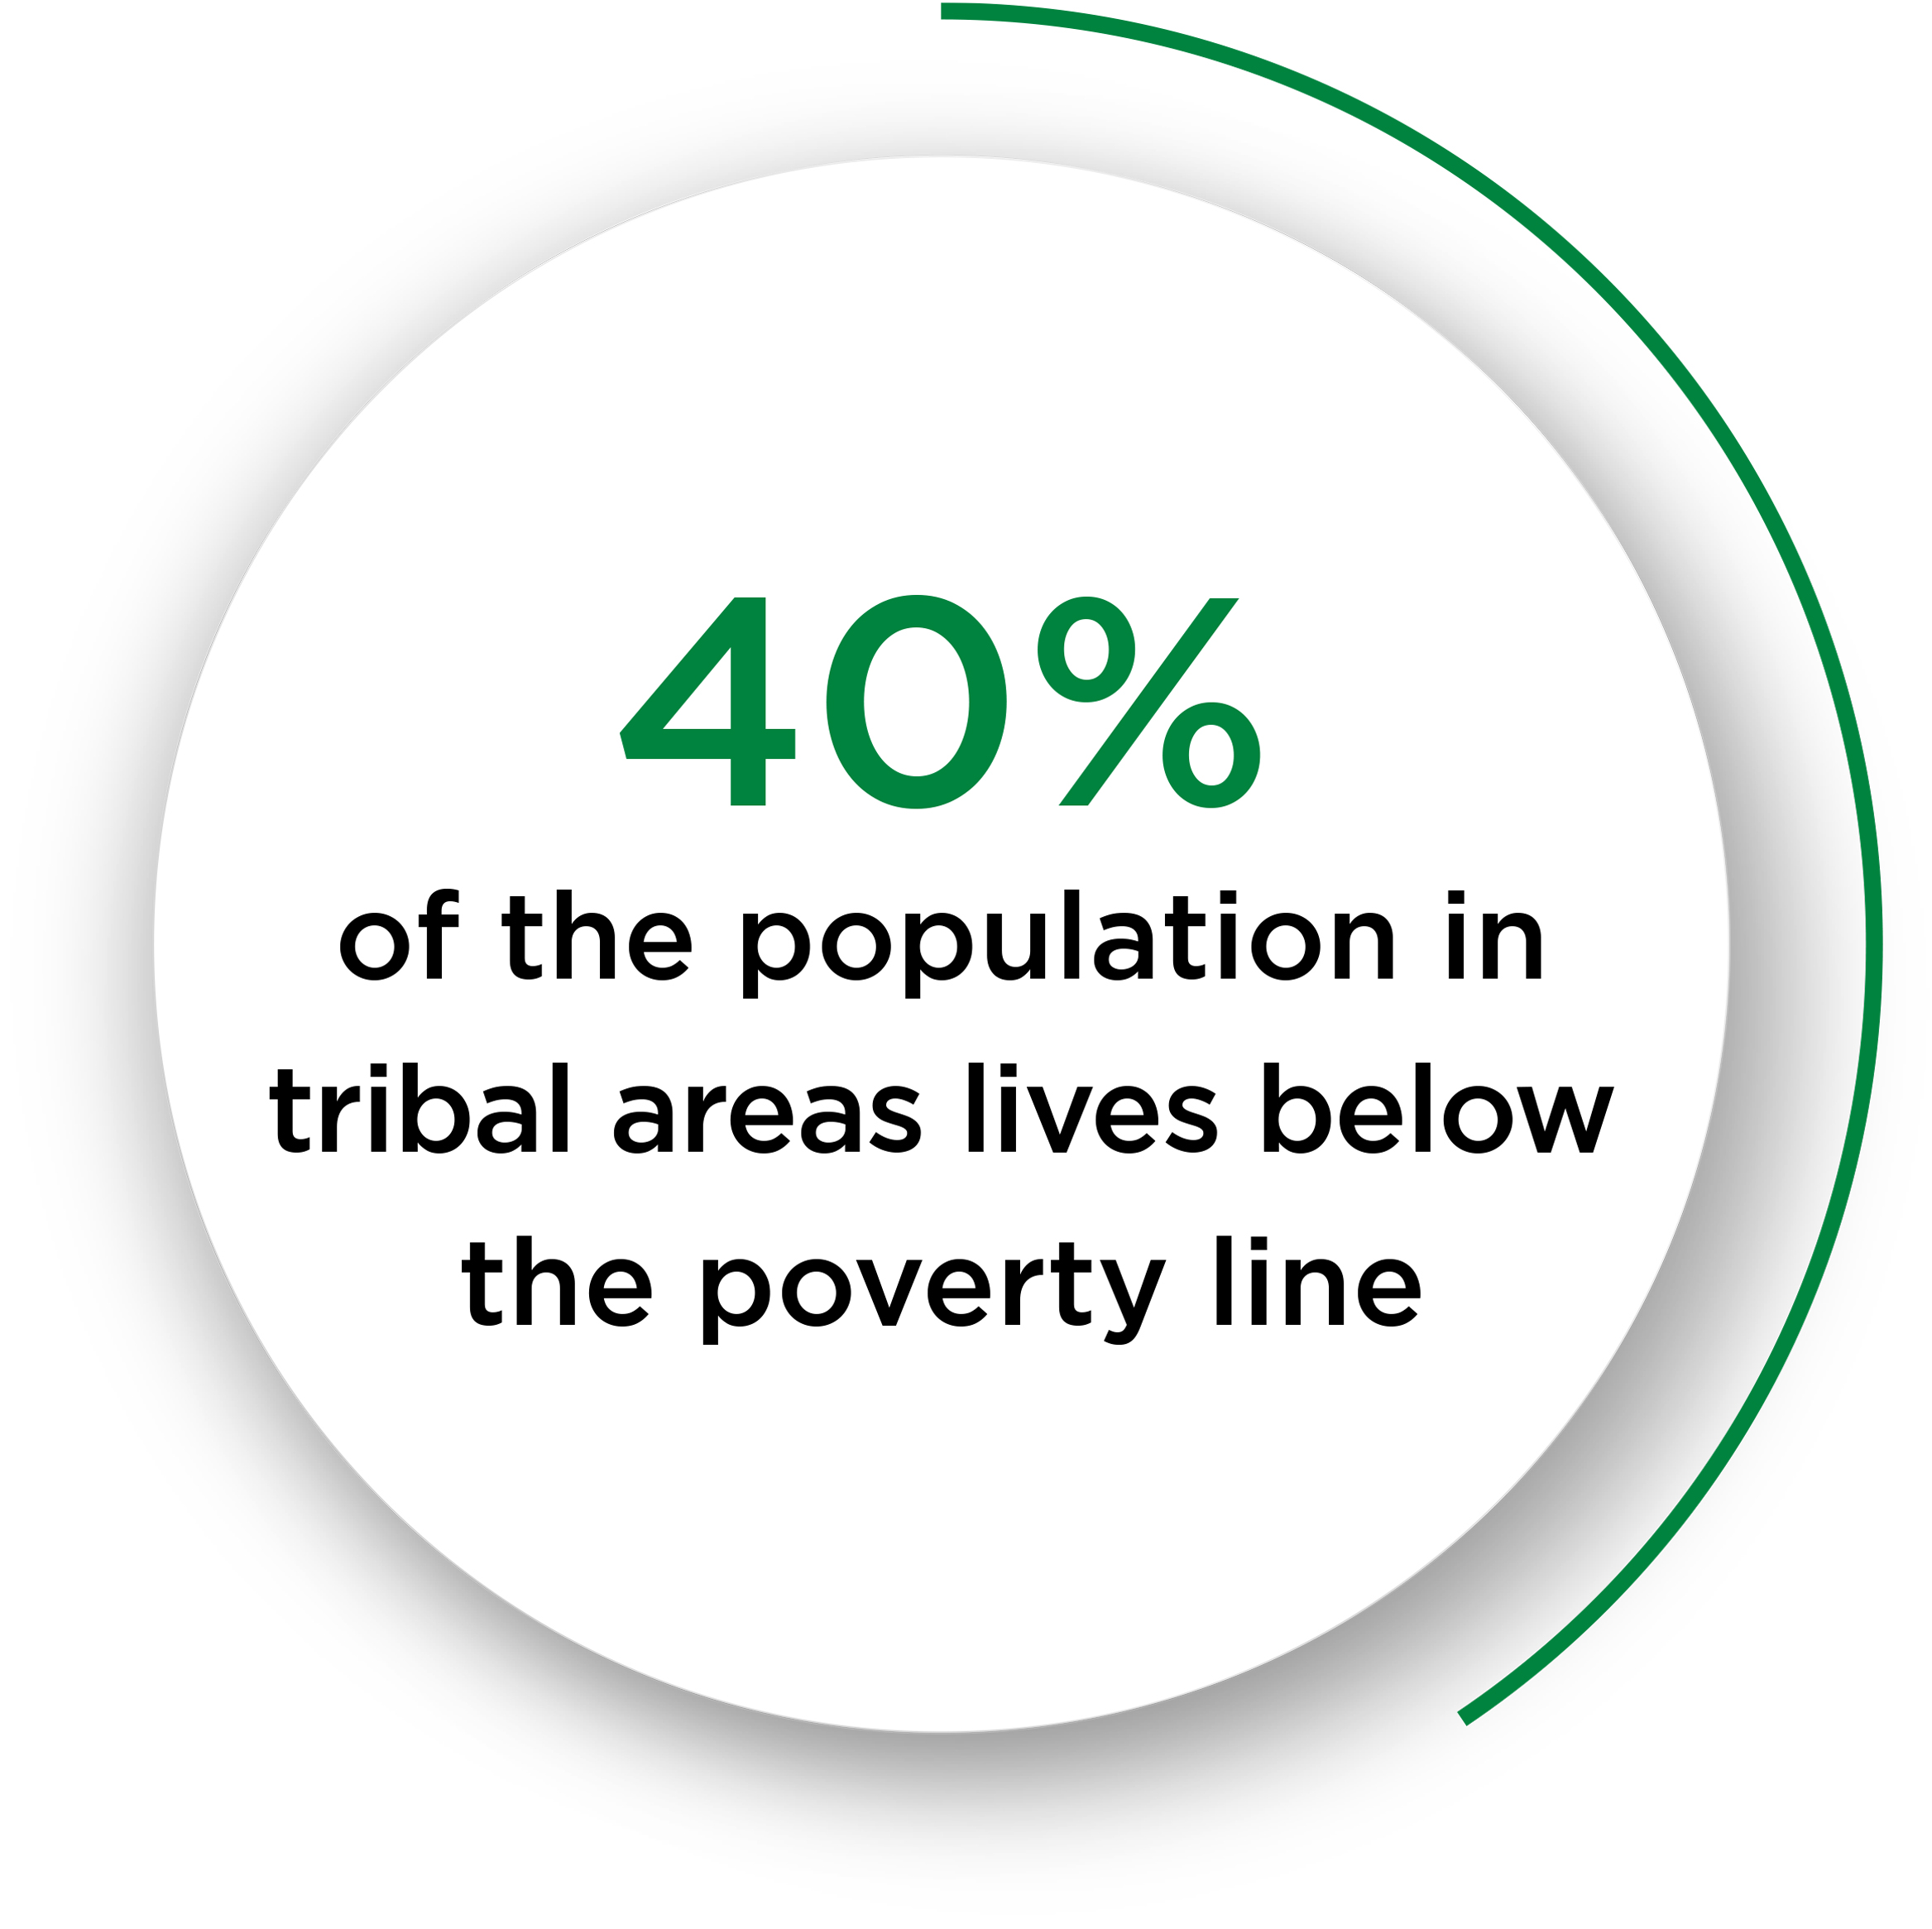 40% of India's tribal population lives behind the poverty line